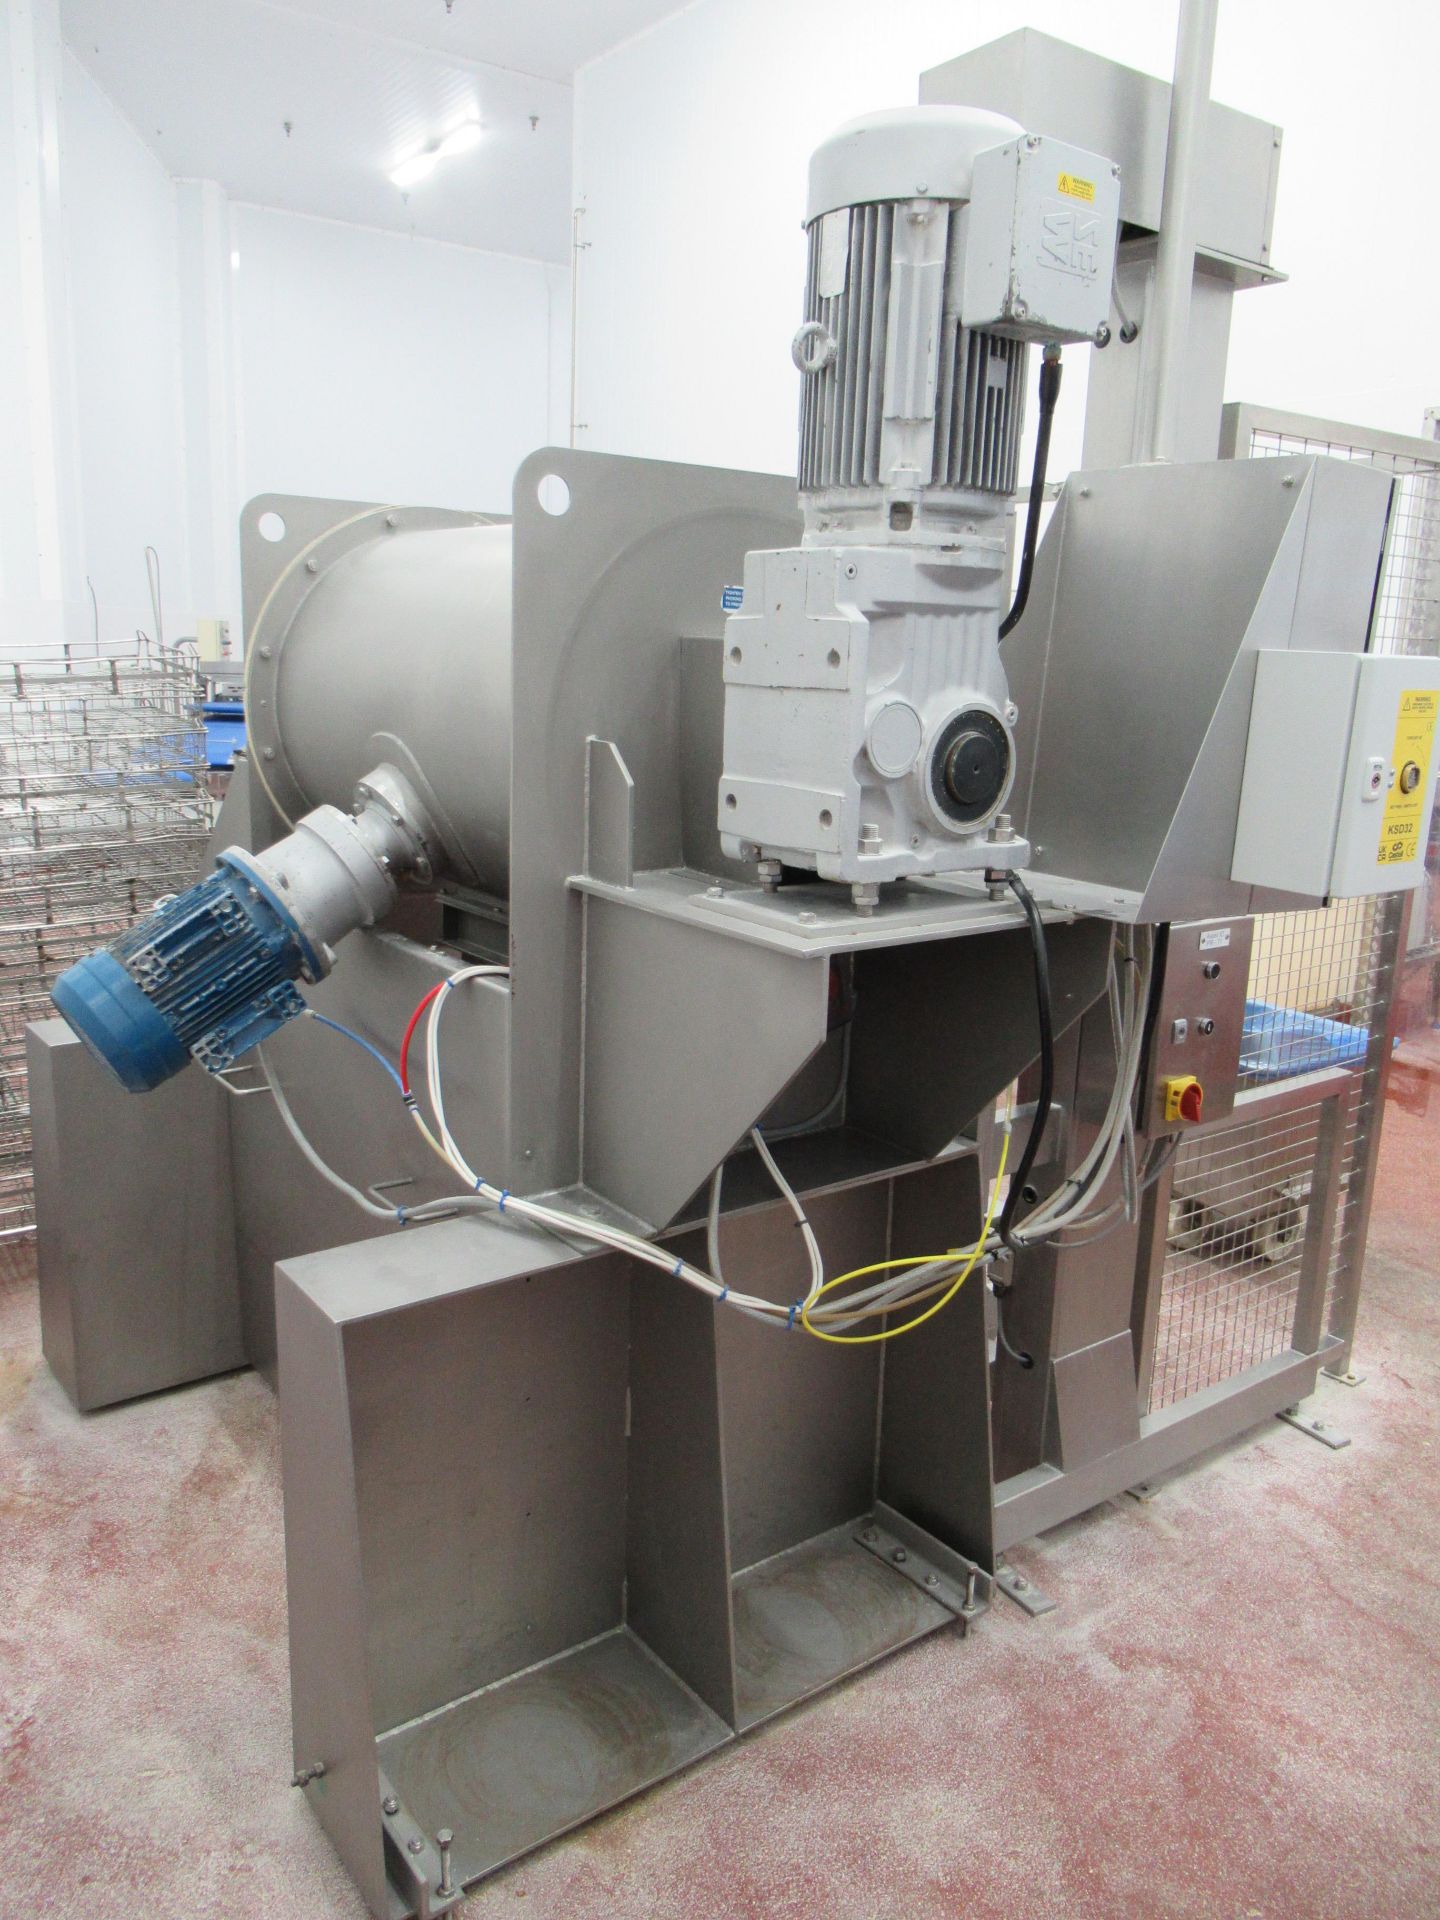 Winkworth RT200 stainless steel mixer Serial no: 16497 (2001) tare weight 1080kg, with fixed Base - Image 5 of 14